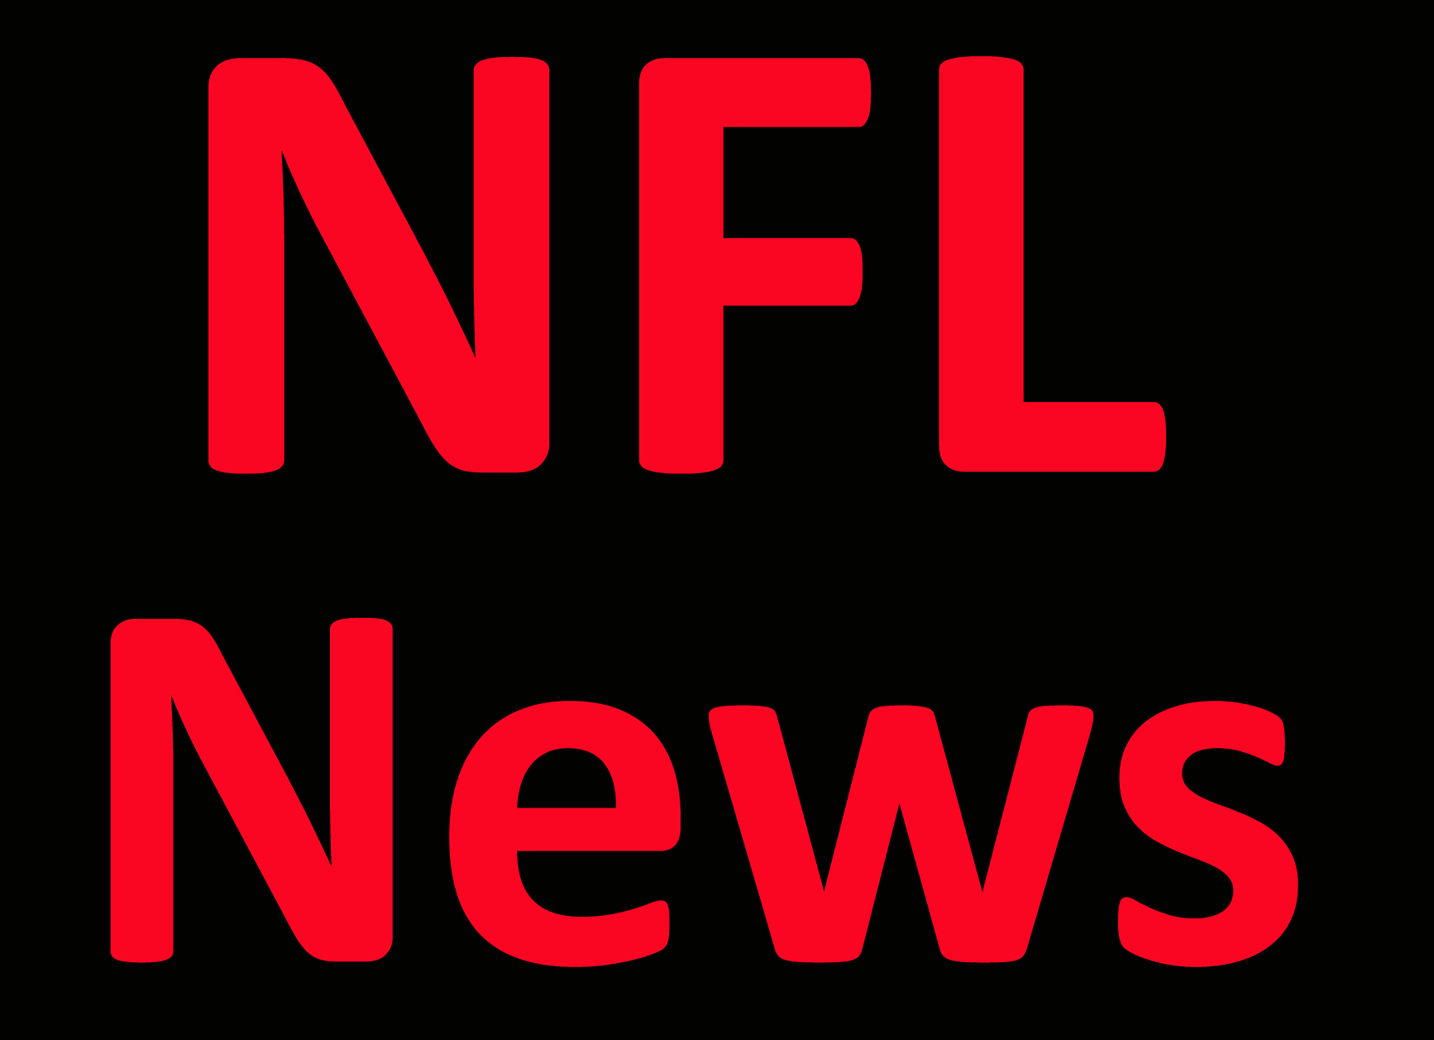 NFL News: 10 most popular bets and 10 largest handles Per Report